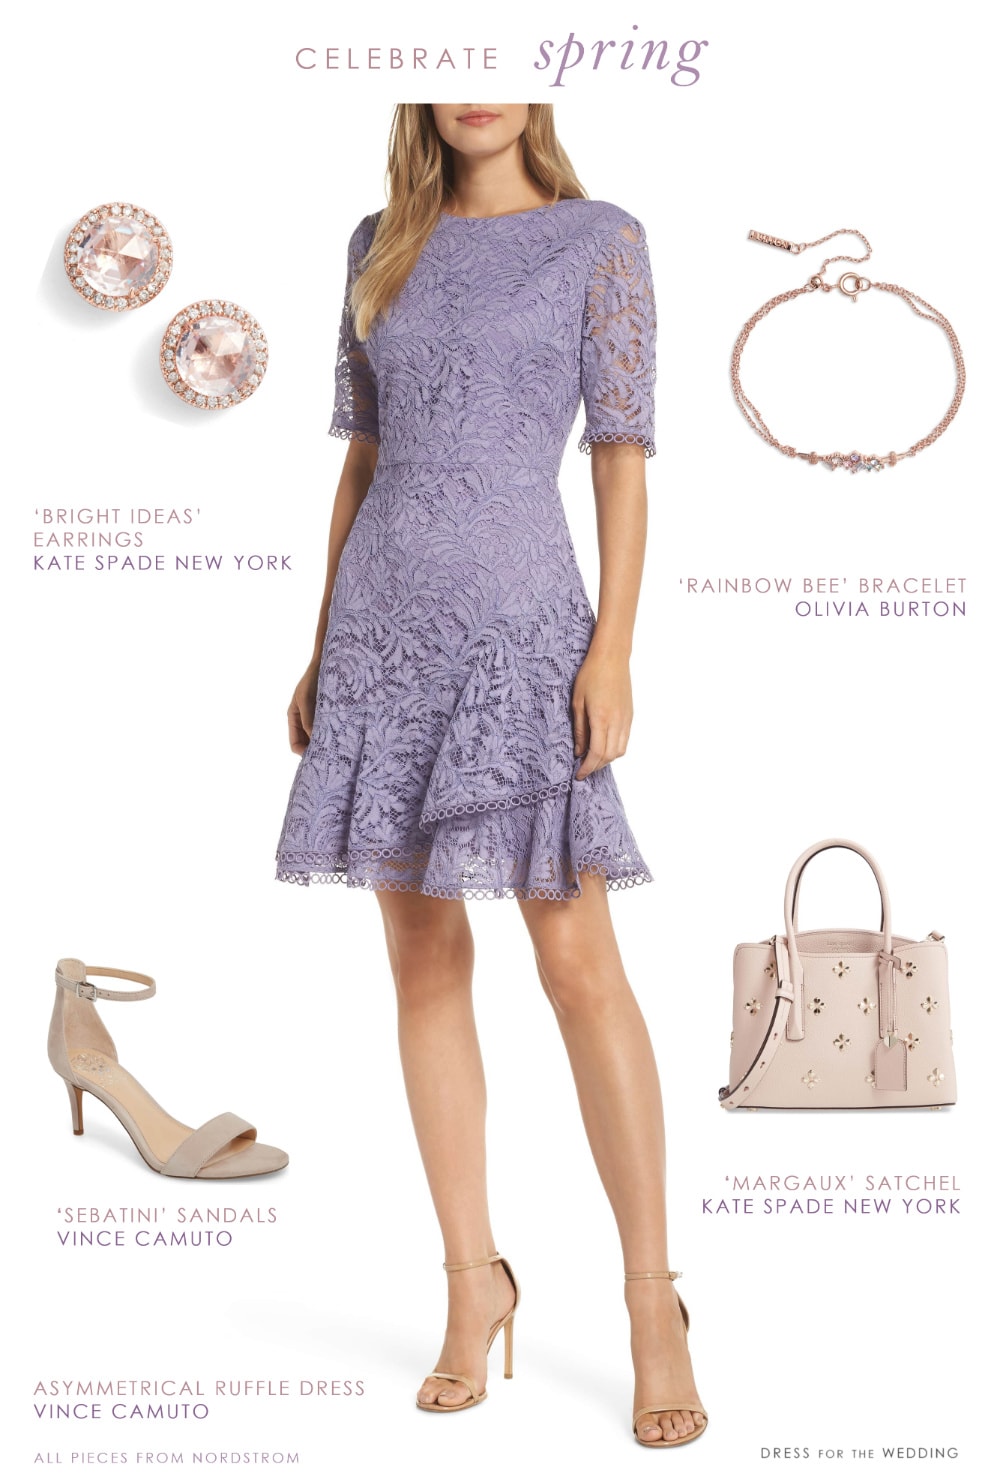 New Outfits for Spring Celebrations - Dress for the Wedding